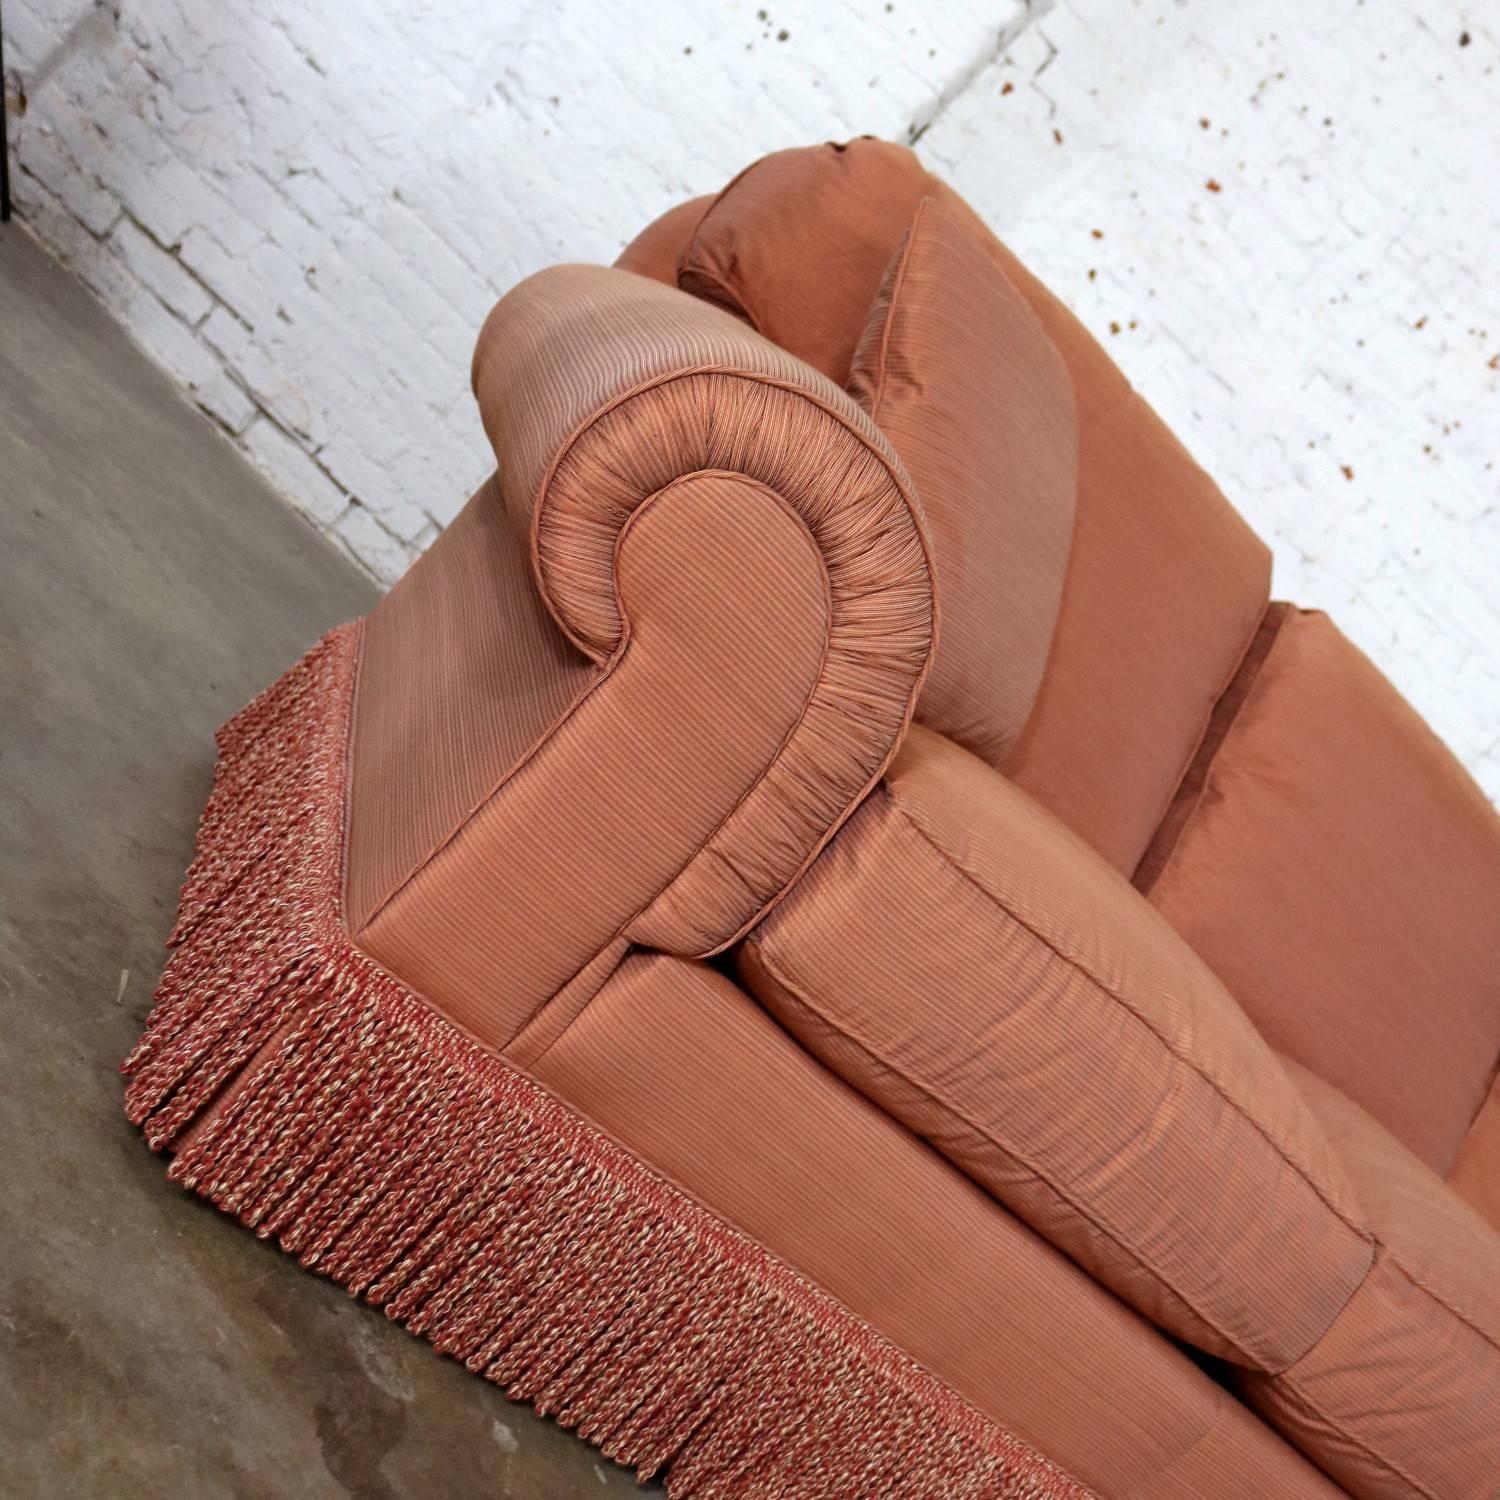 American Baker Sofas Lawson Style from the Crown and Tulip Collection Terracotta